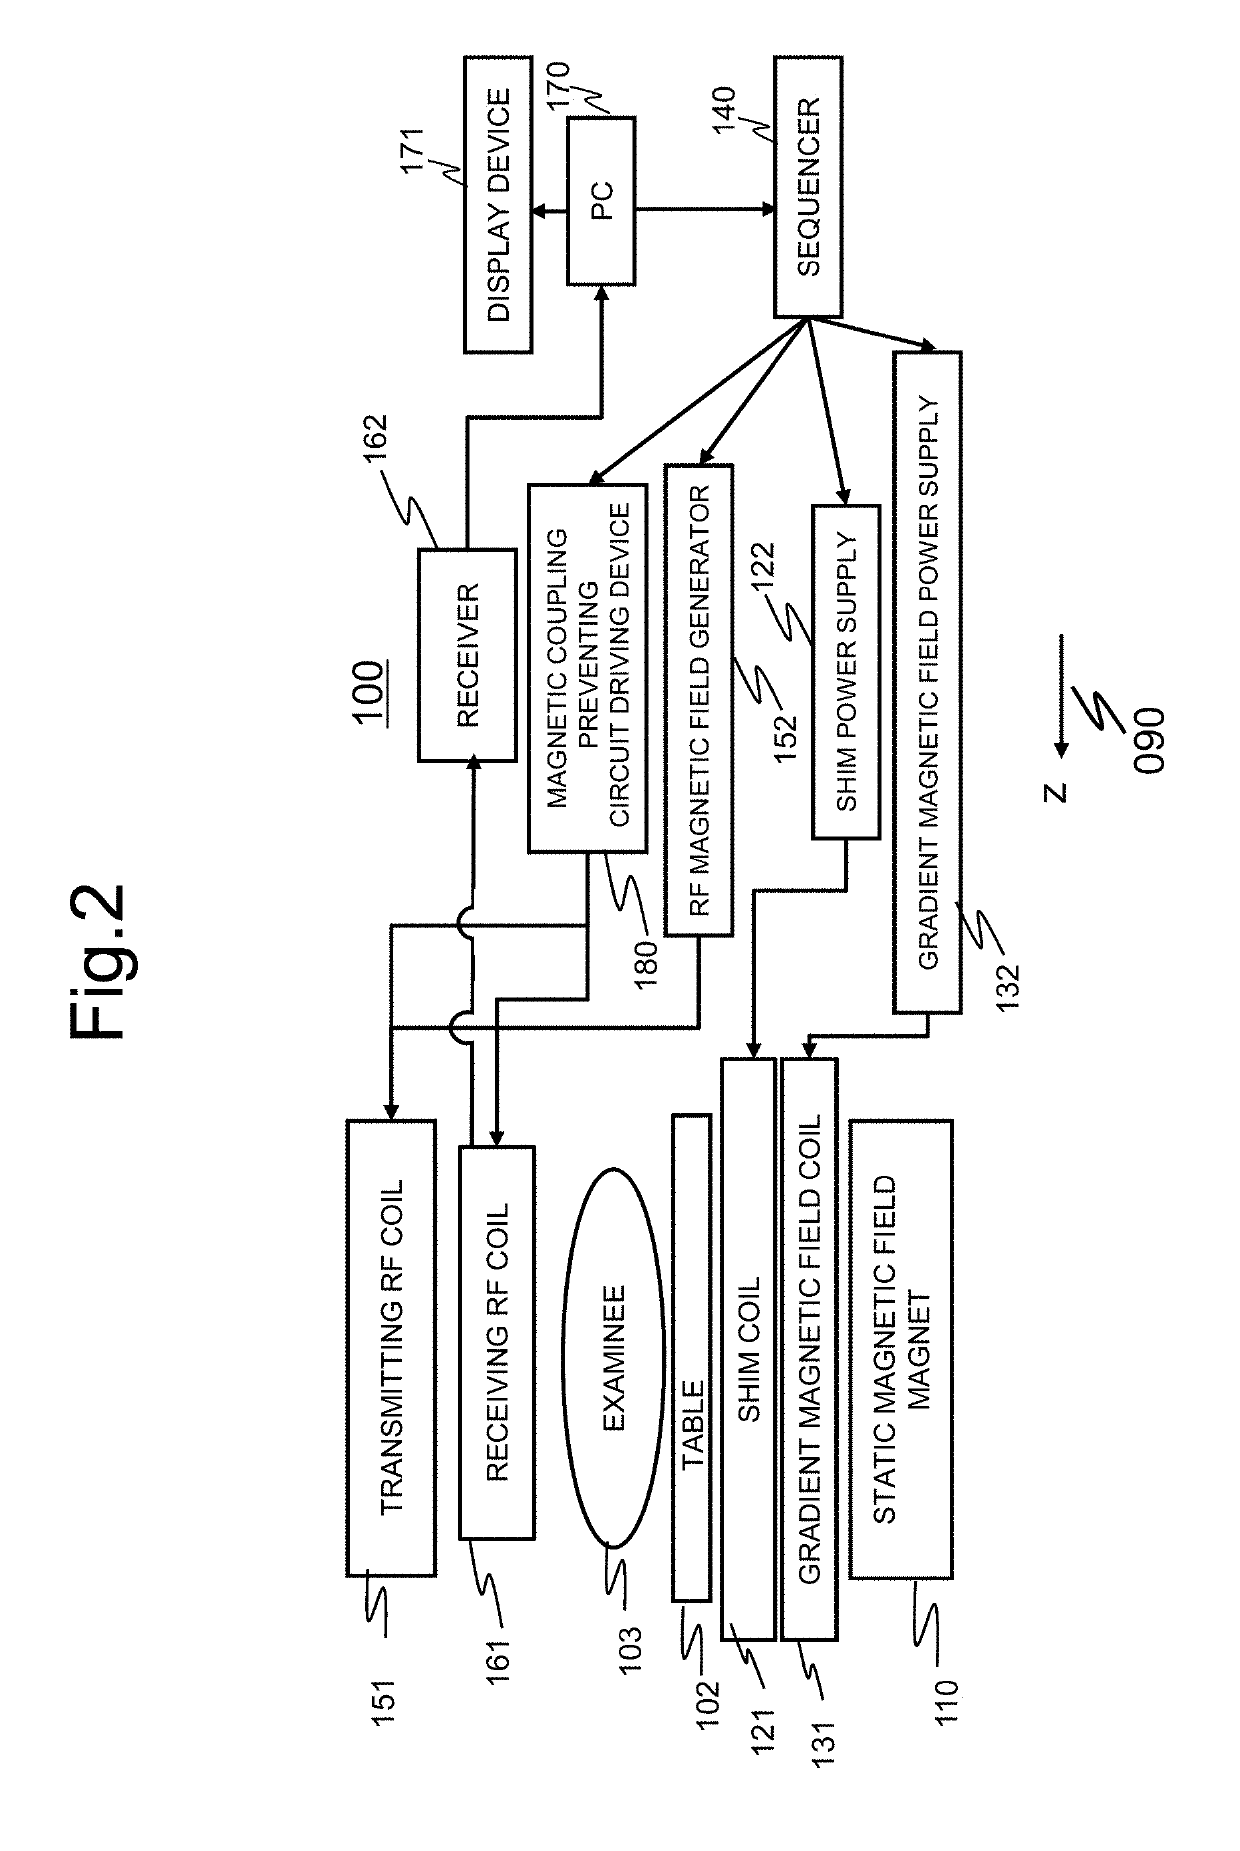 Array coil and magnetic resonance imaging apparatus